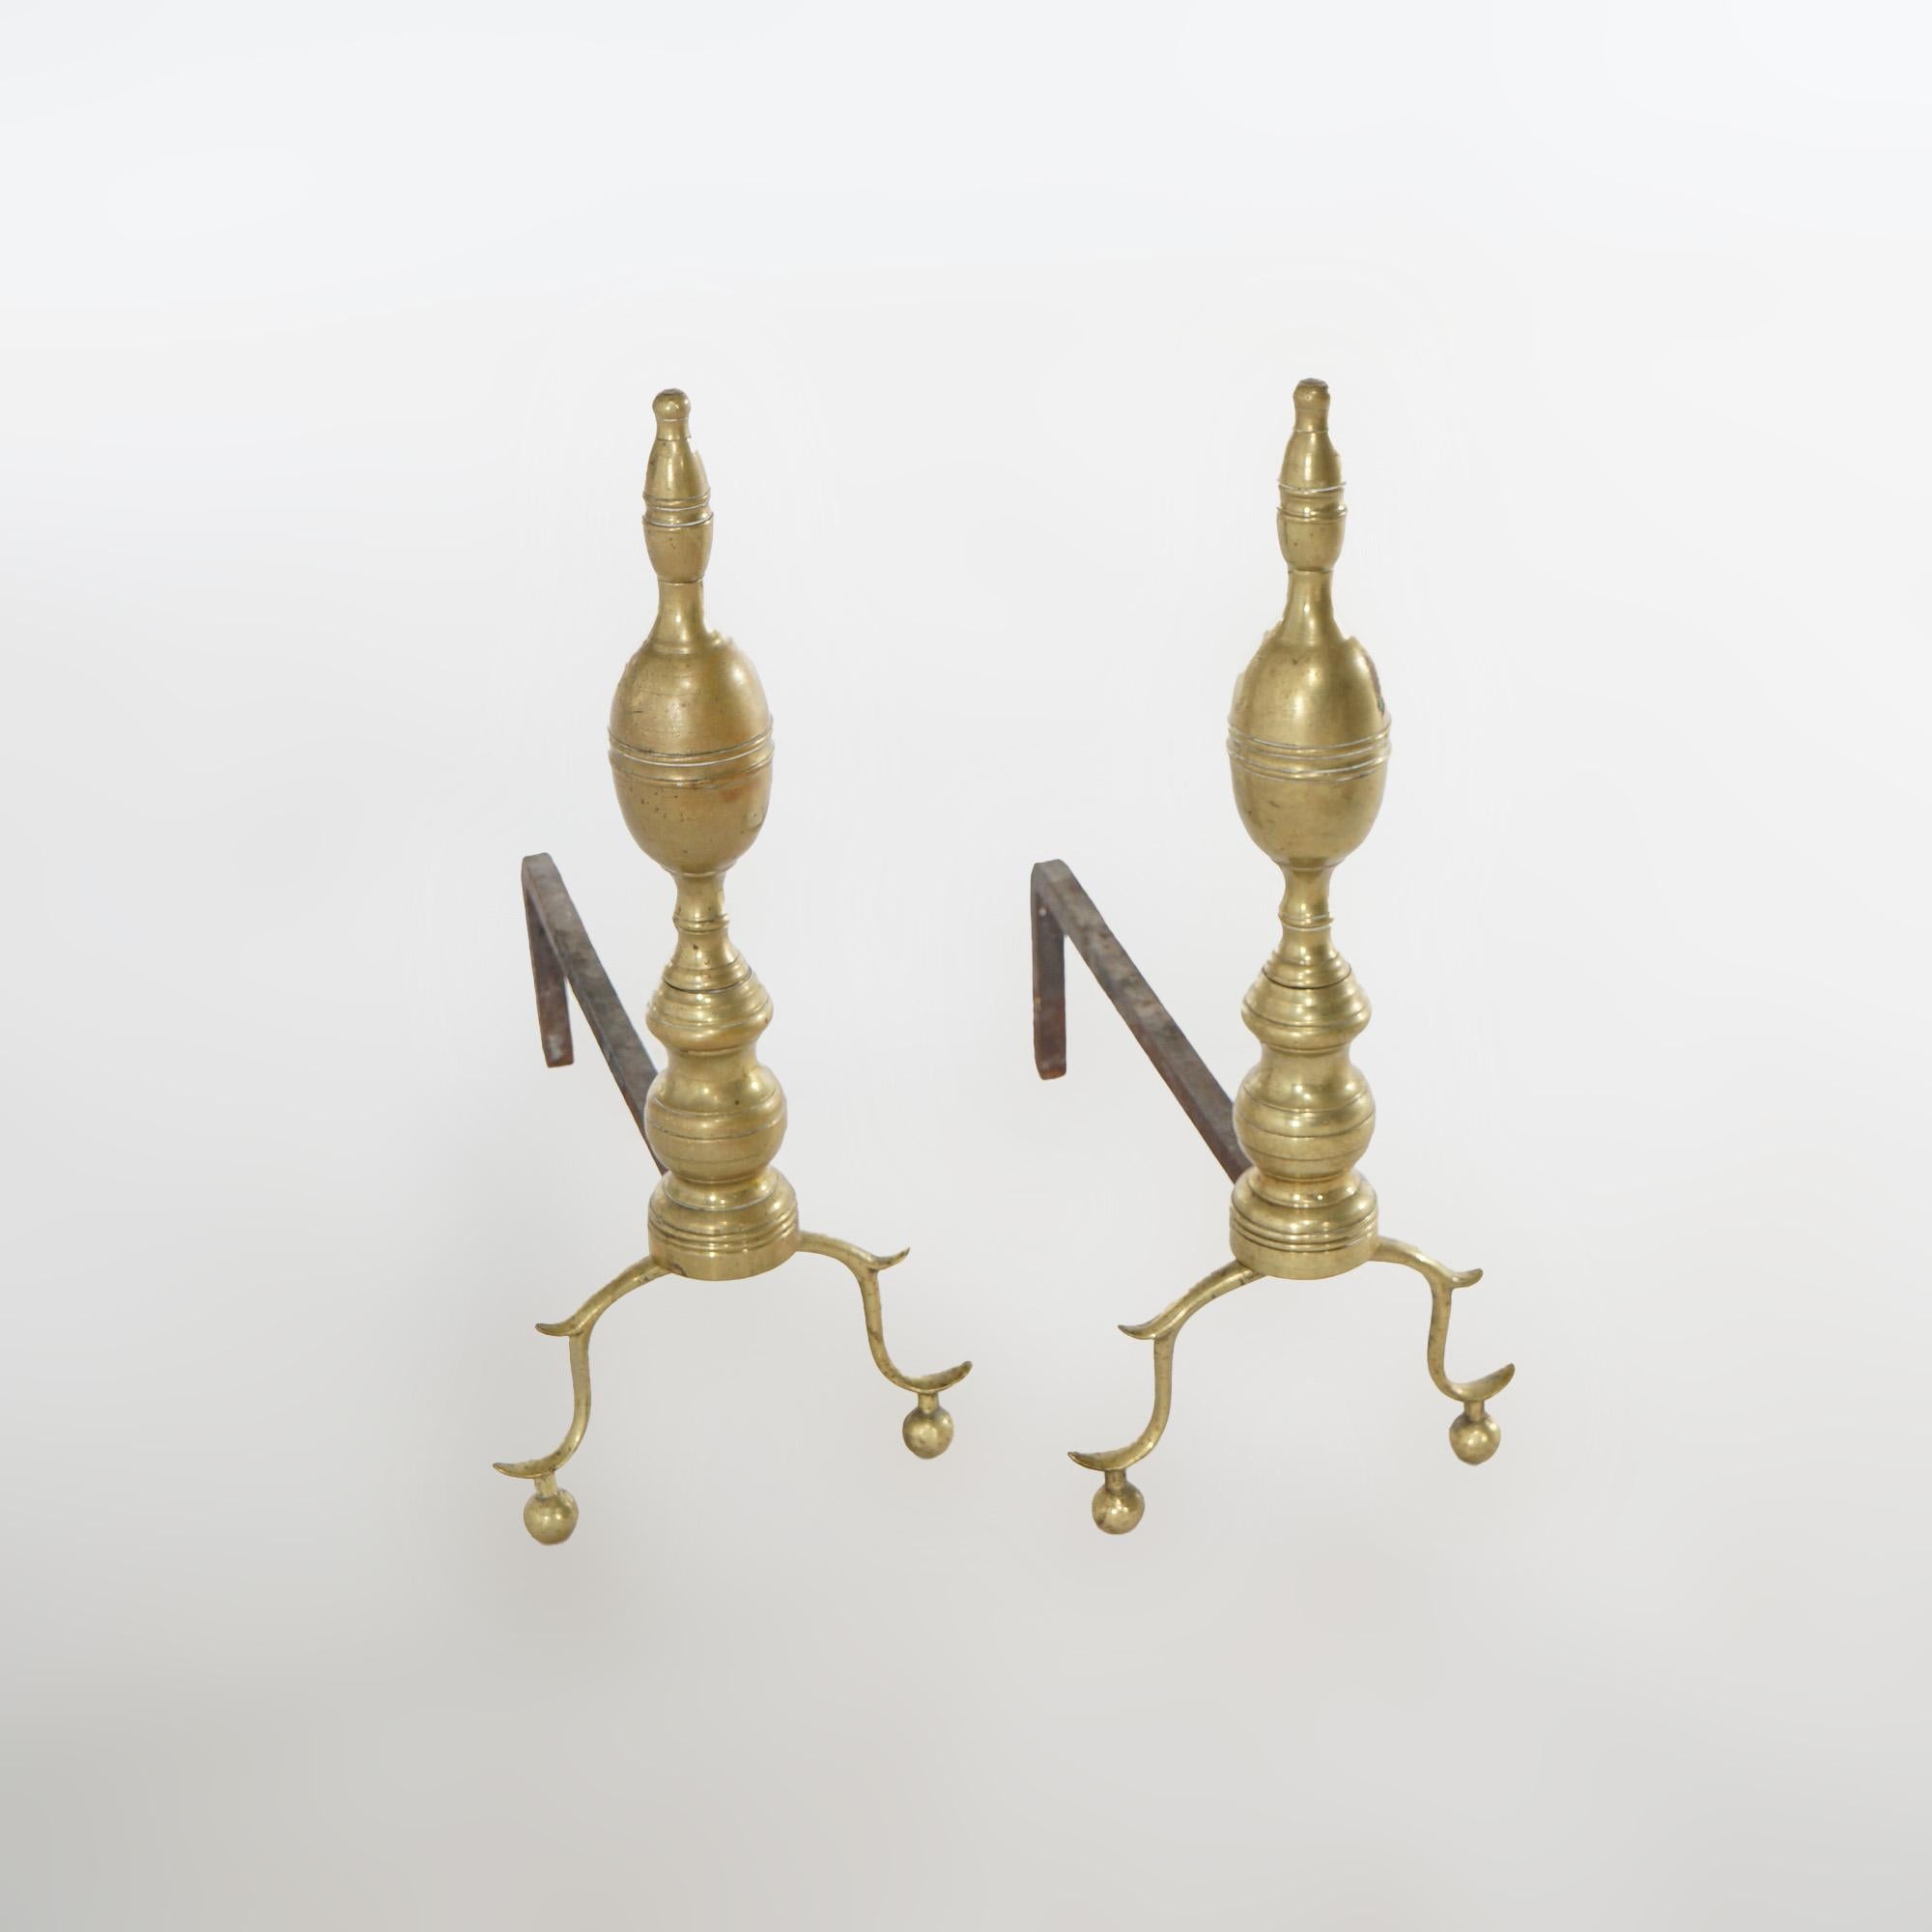 An antique set of fireplace andirons offers brass construction in balustrade form raised on scroll form cabriole legs with ball feet, c1900
 
Measure - 20